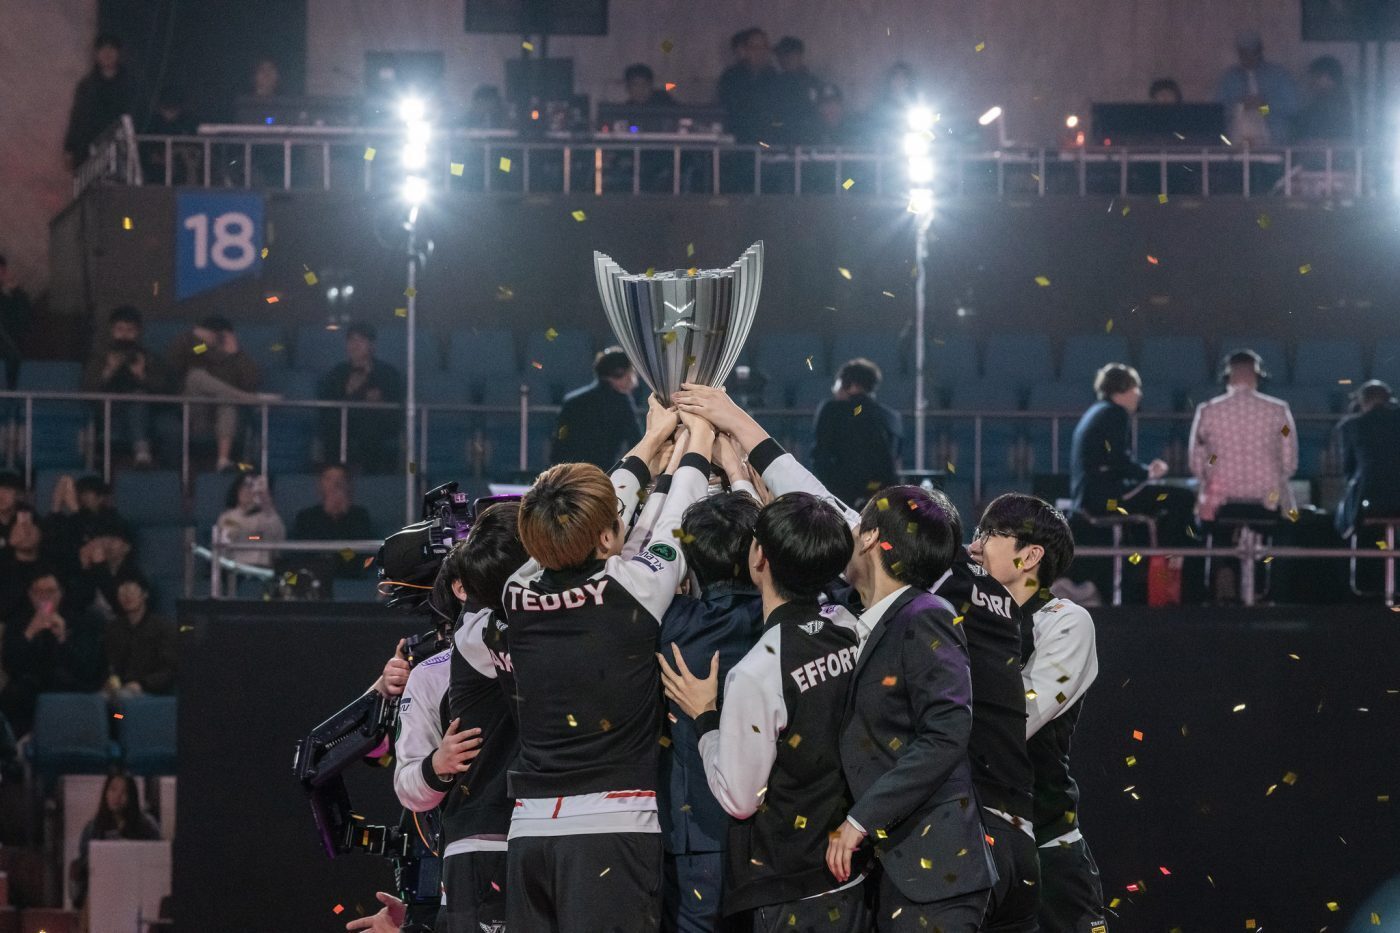 SK Telecom T1 took home the trophy in the LCK Spring Split. (Photo courtesy of League of Legends Champions Korea LCK / Flickr)